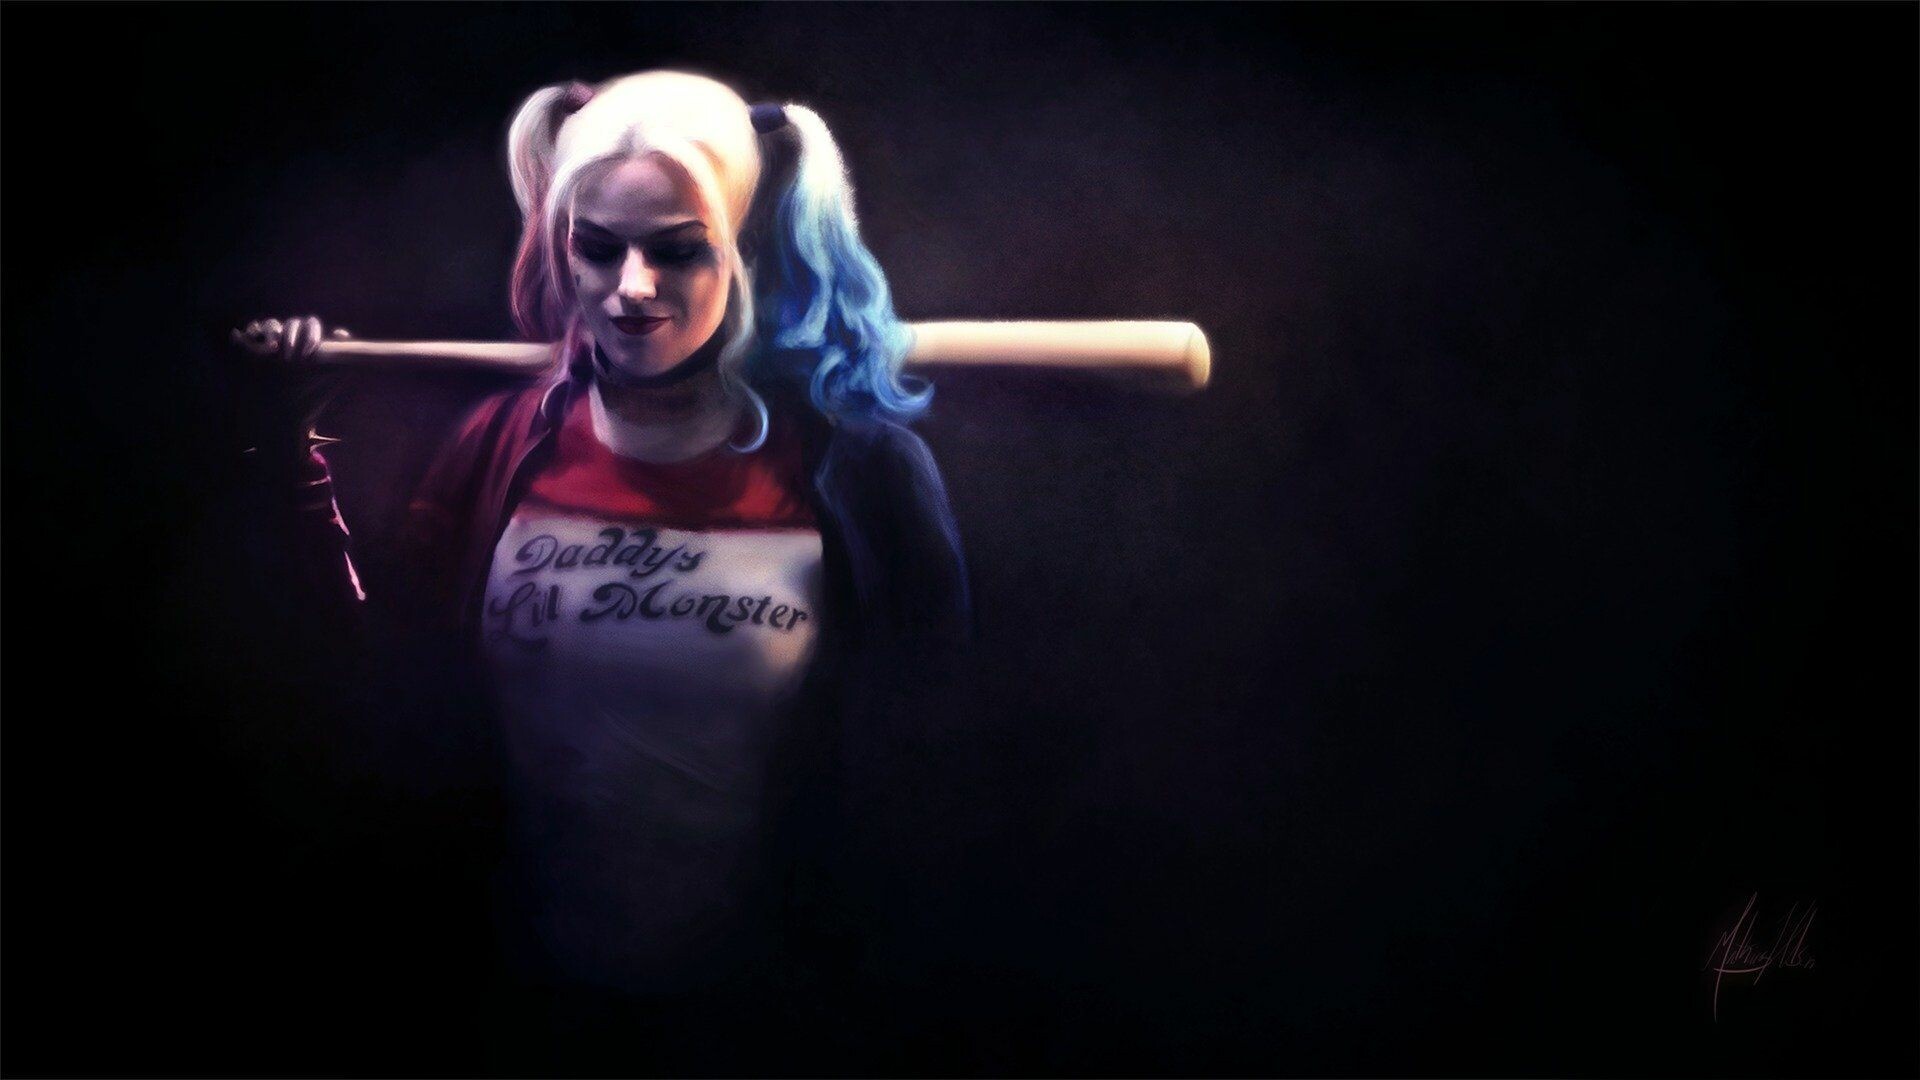 Harley Quinn: Appears in current DC Films, portrayed by Margot Robbie. 1920x1080 Full HD Background.